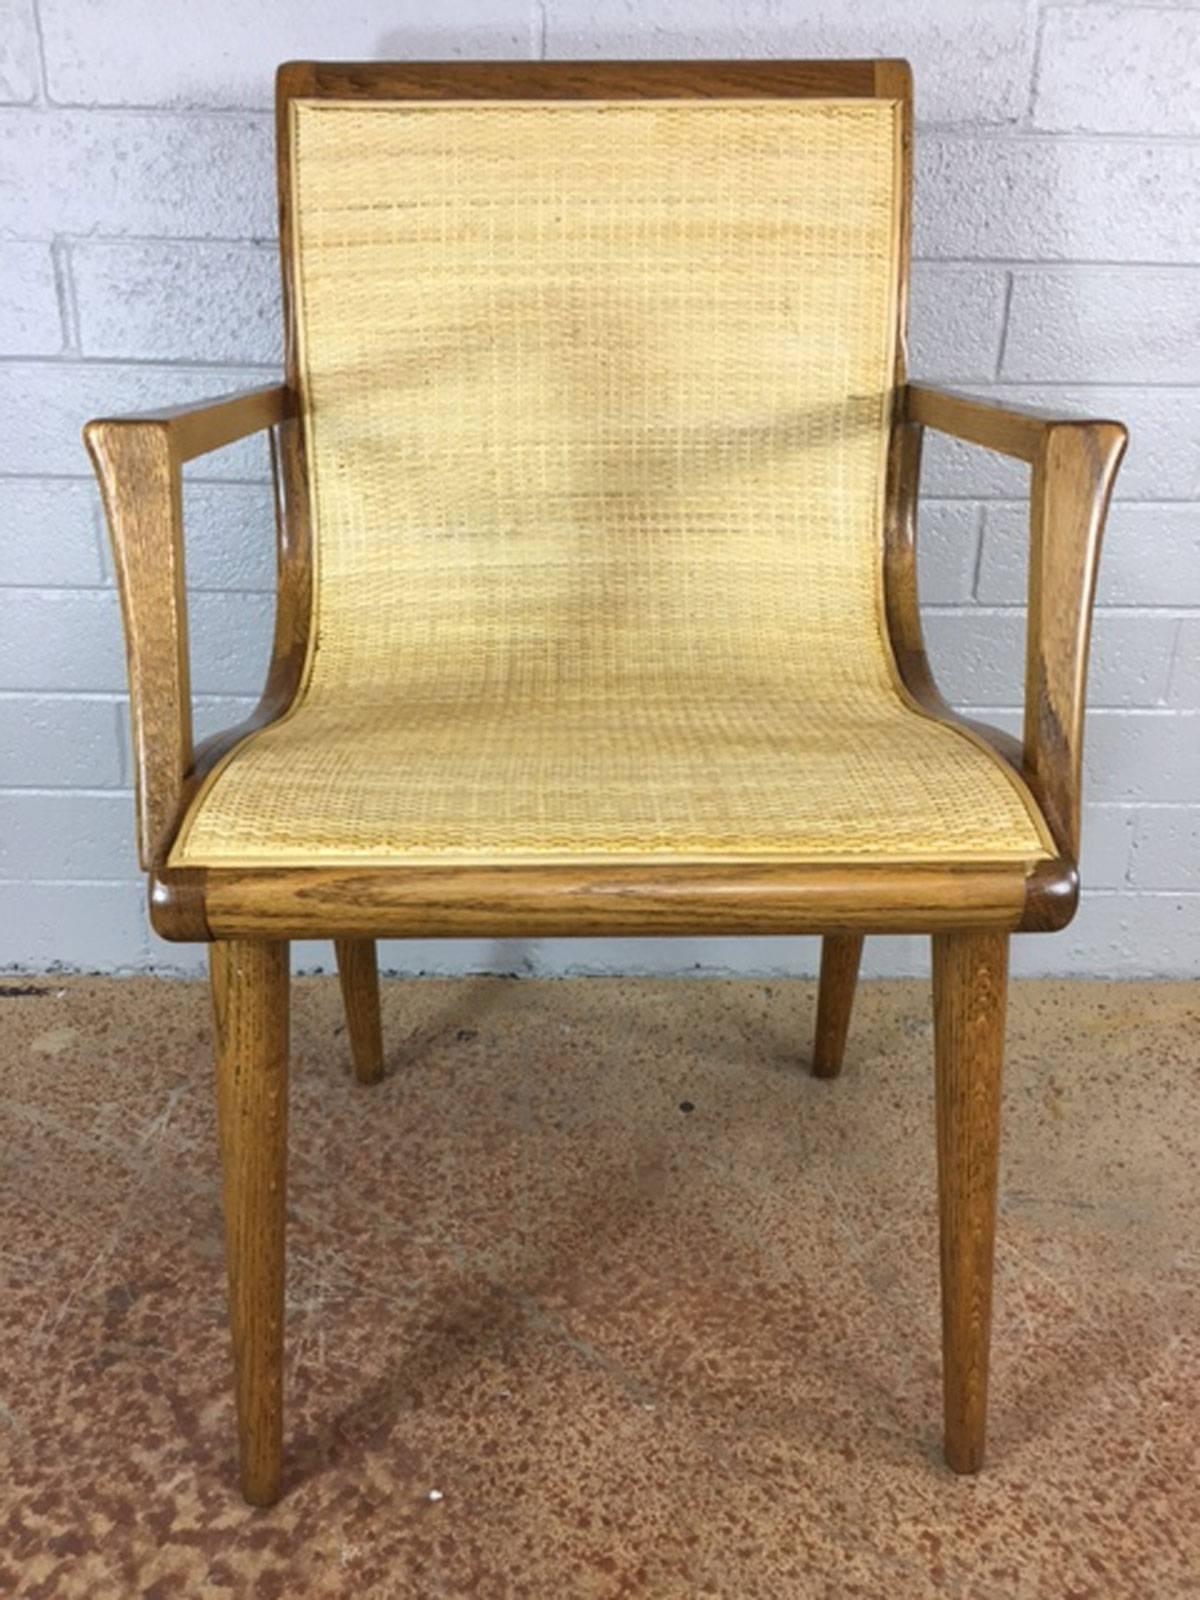 Unique slipper chair in oak with new cane sling. Great lines. Elegant side chair, circa 1950s. No maker.